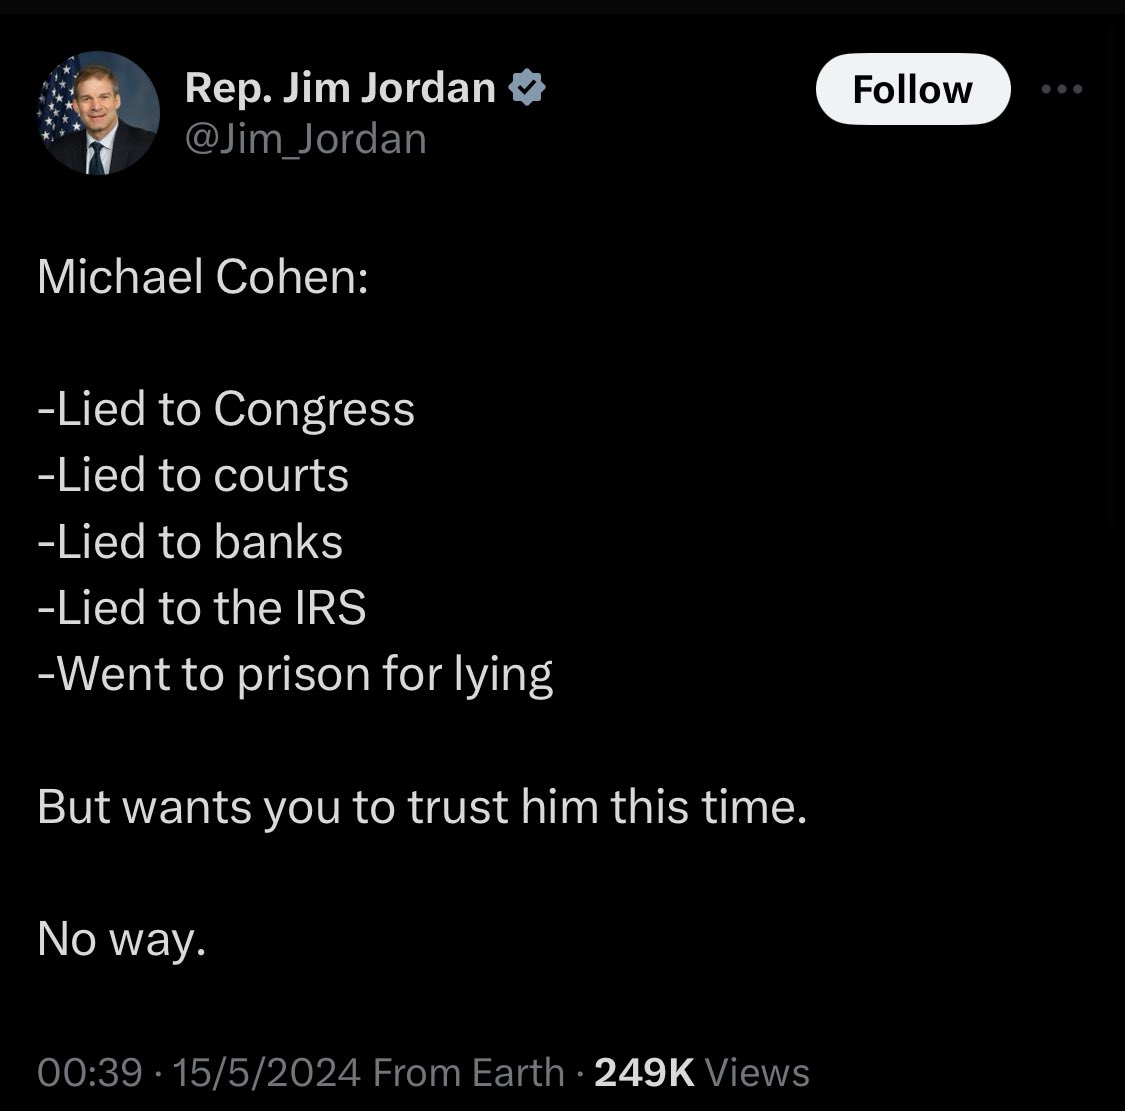 Michael Cohen: - Lied to Congress for Trump - Lied to Courts for Trump - Lied to banks for Trump - Lied to the IRS for Trump - Went to prison for lying for Trump #FixedIt Gym @jim_jordan